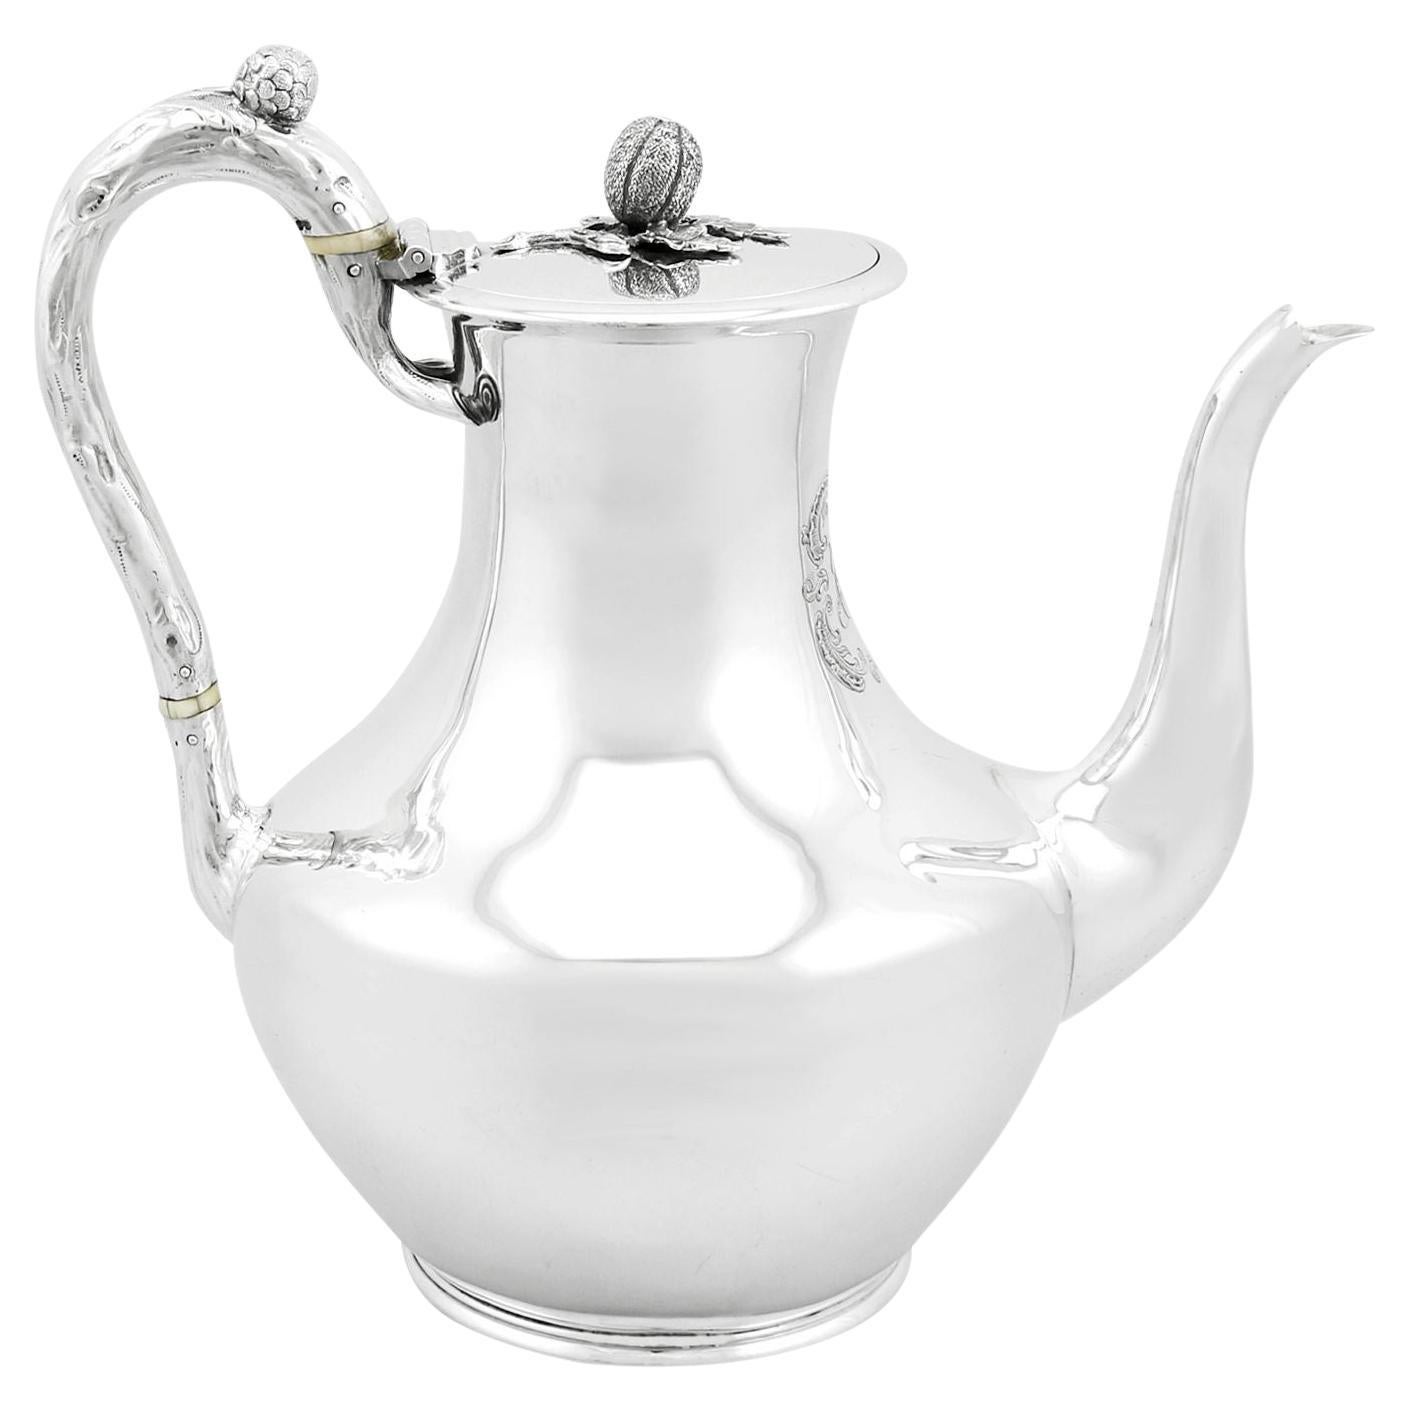 Victorian Sterling Silver Coffee Pot